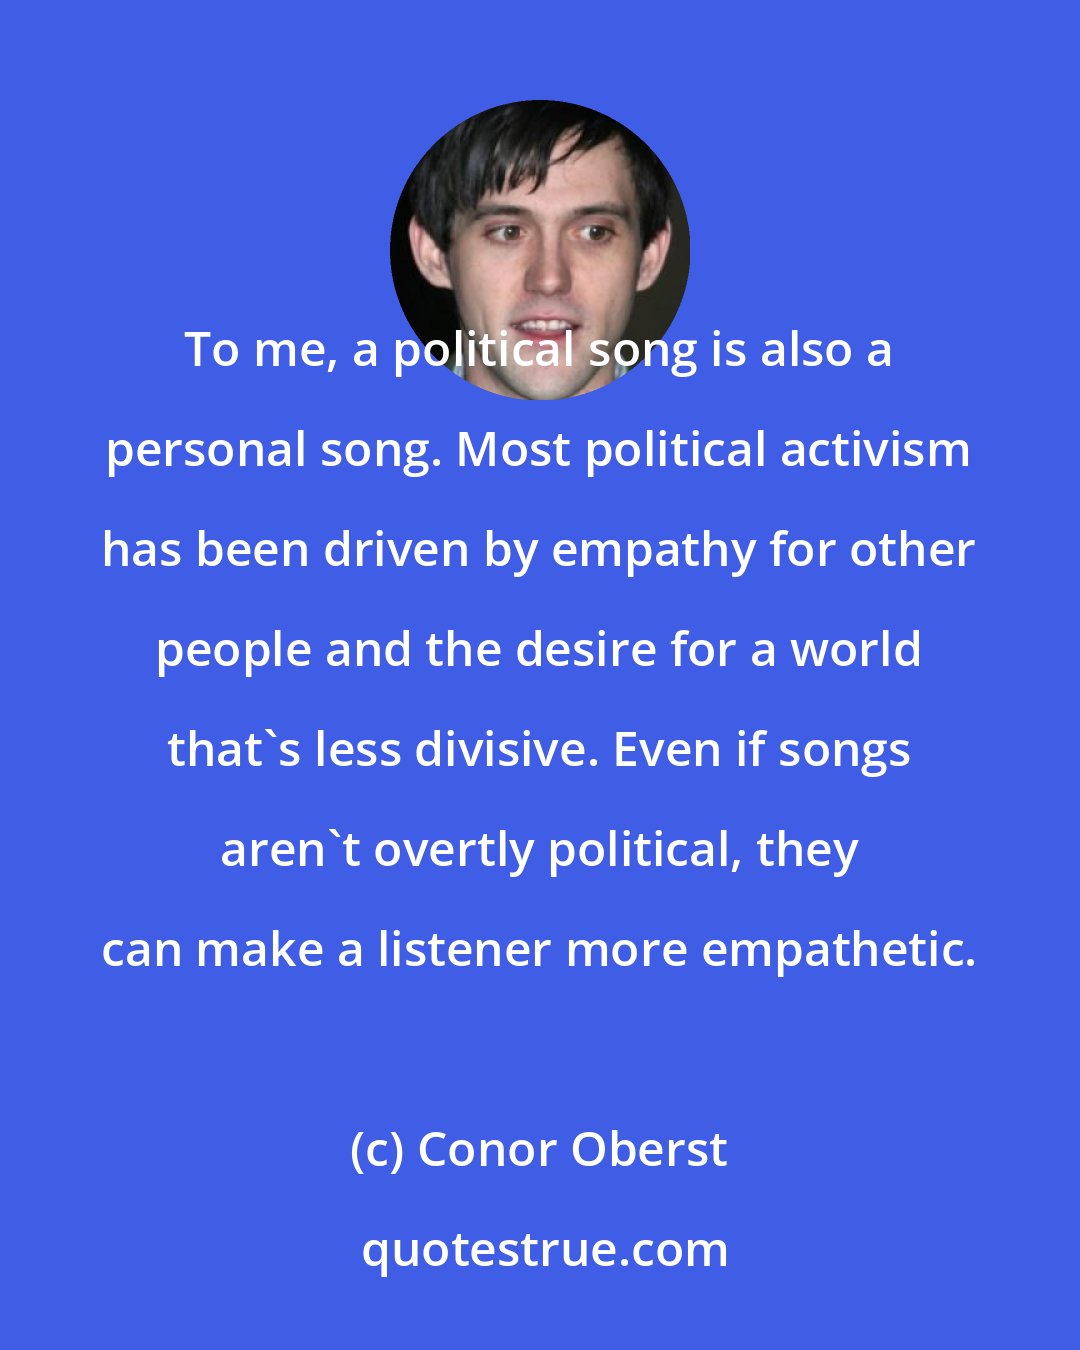 Conor Oberst: To me, a political song is also a personal song. Most political activism has been driven by empathy for other people and the desire for a world that's less divisive. Even if songs aren't overtly political, they can make a listener more empathetic.